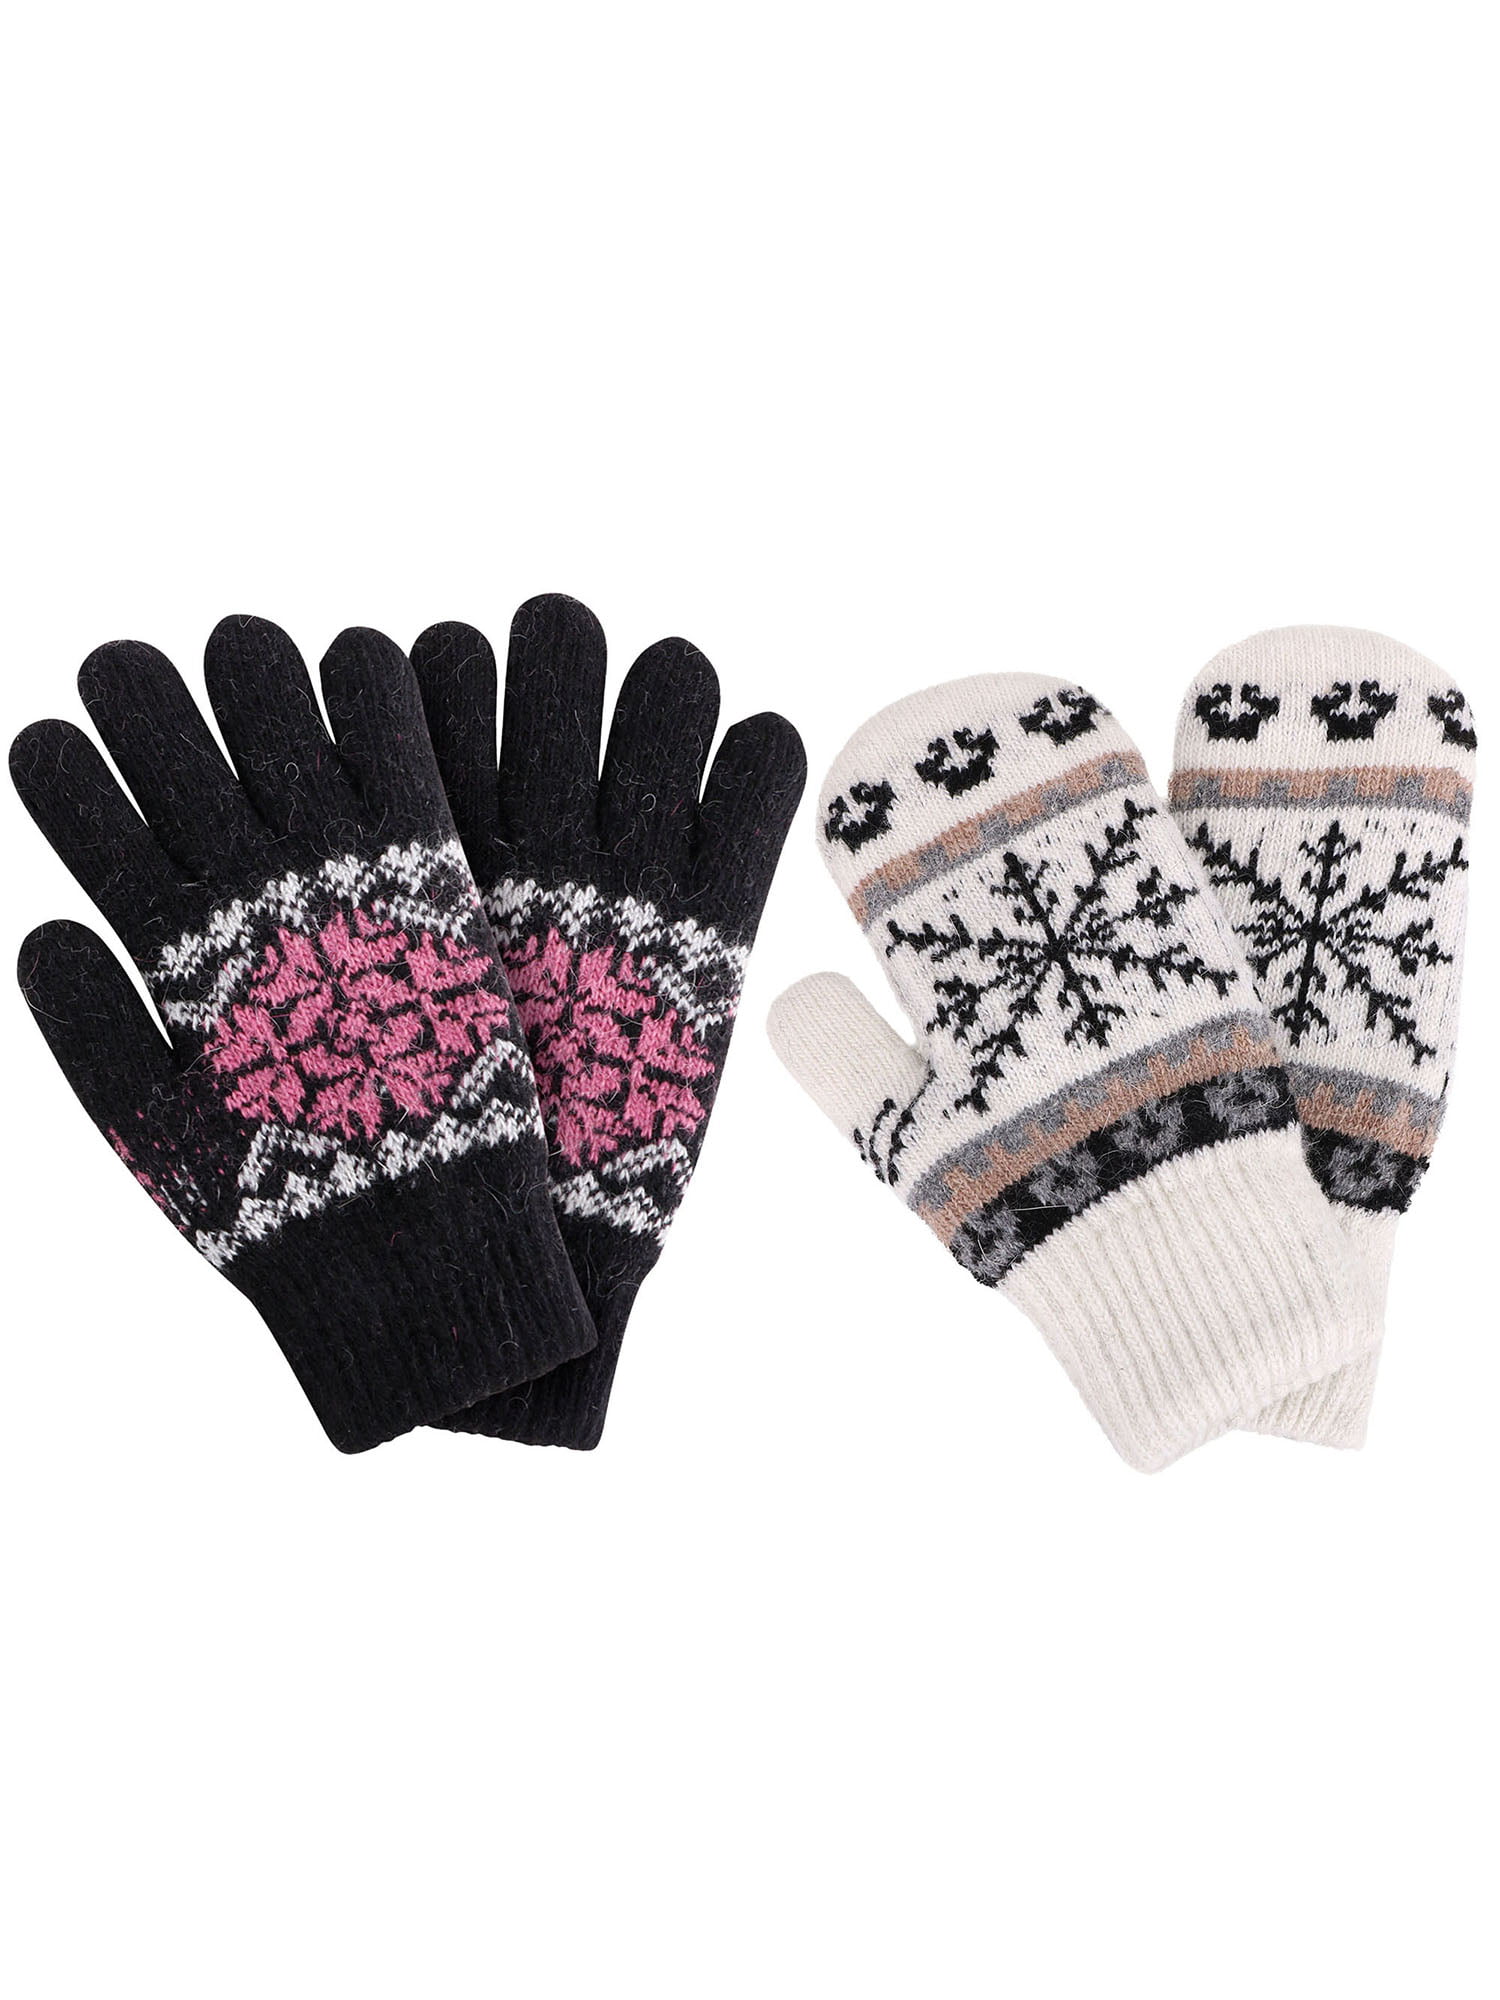 NEW Ladies Winter Mittens Warm Snowflake Fleece Lined Thick Knit Ski Gloves Soft